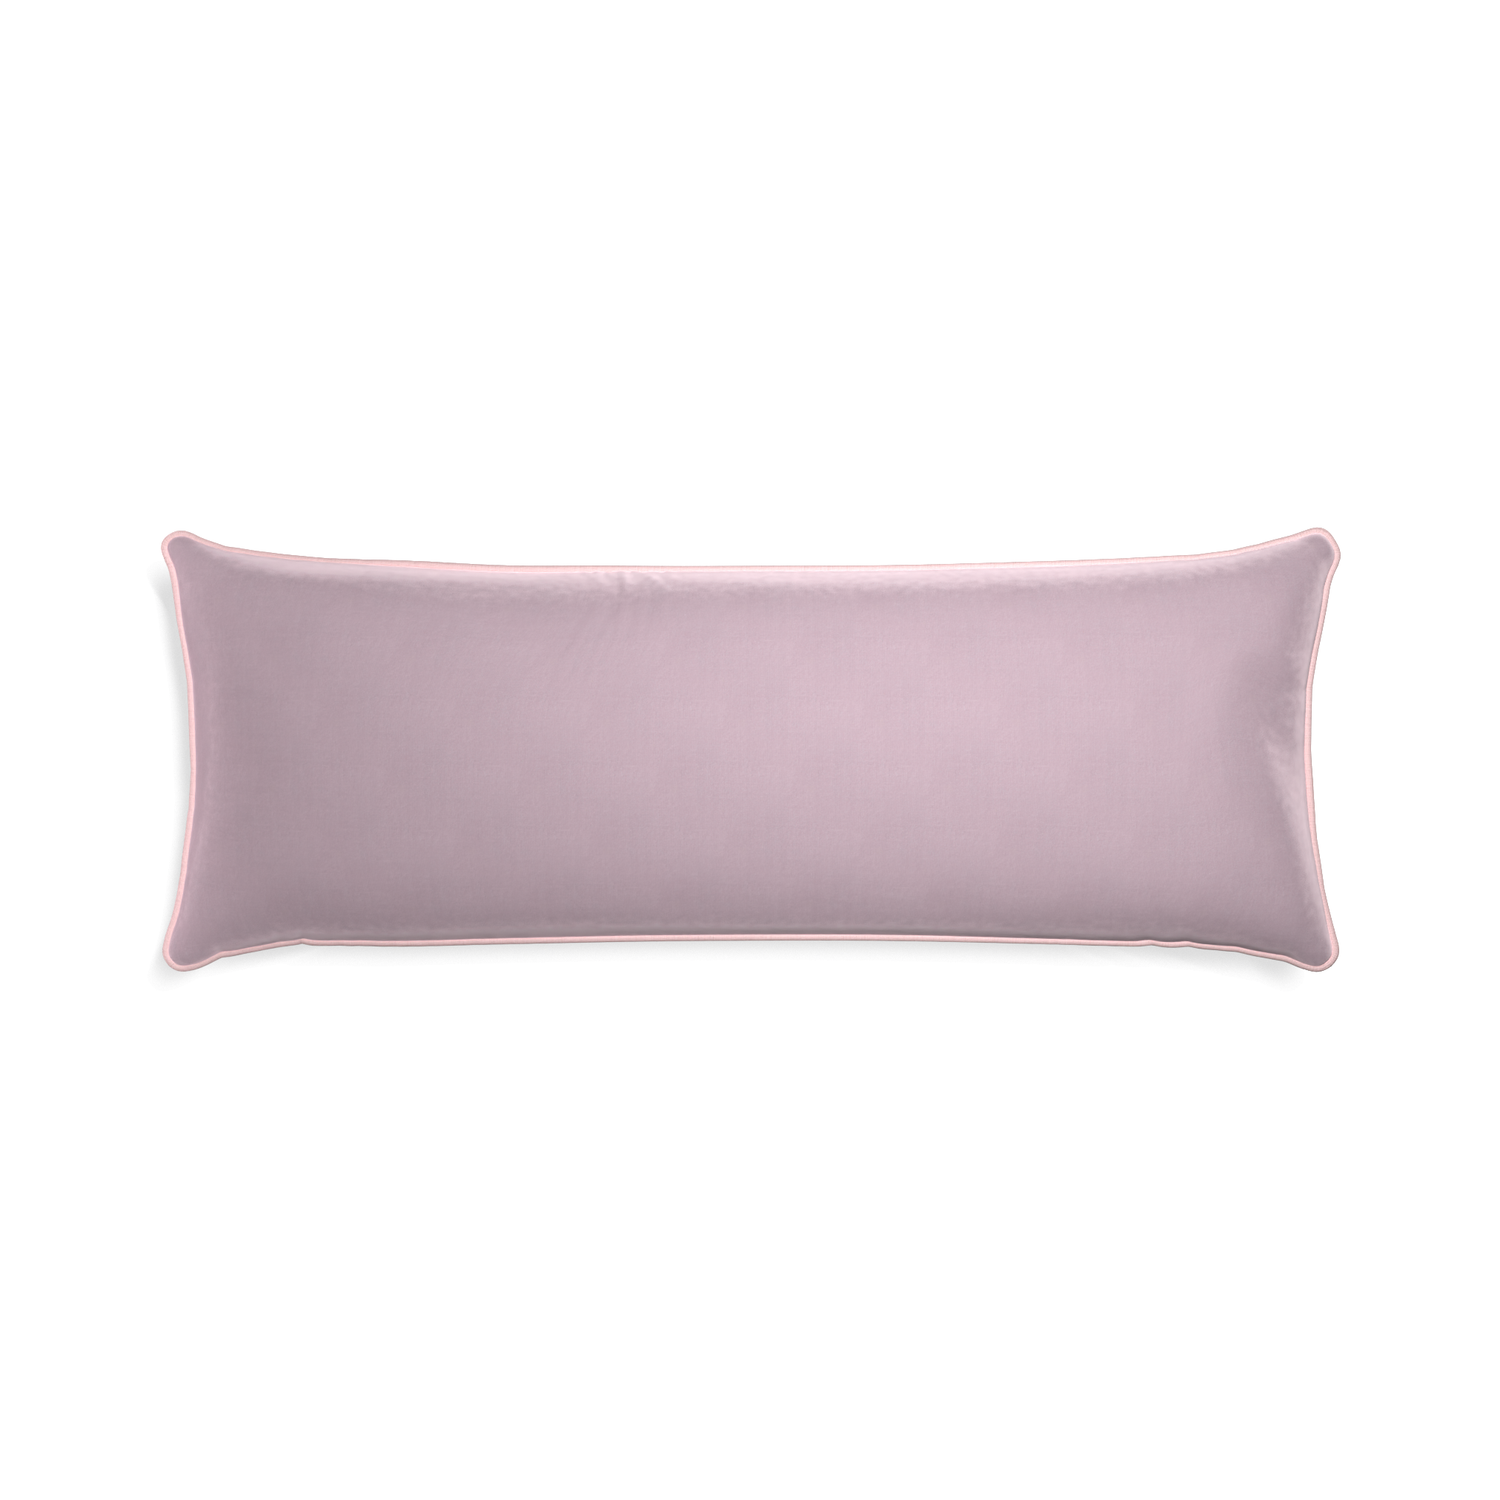 Xl-lumbar lilac velvet custom lilacpillow with petal piping on white background